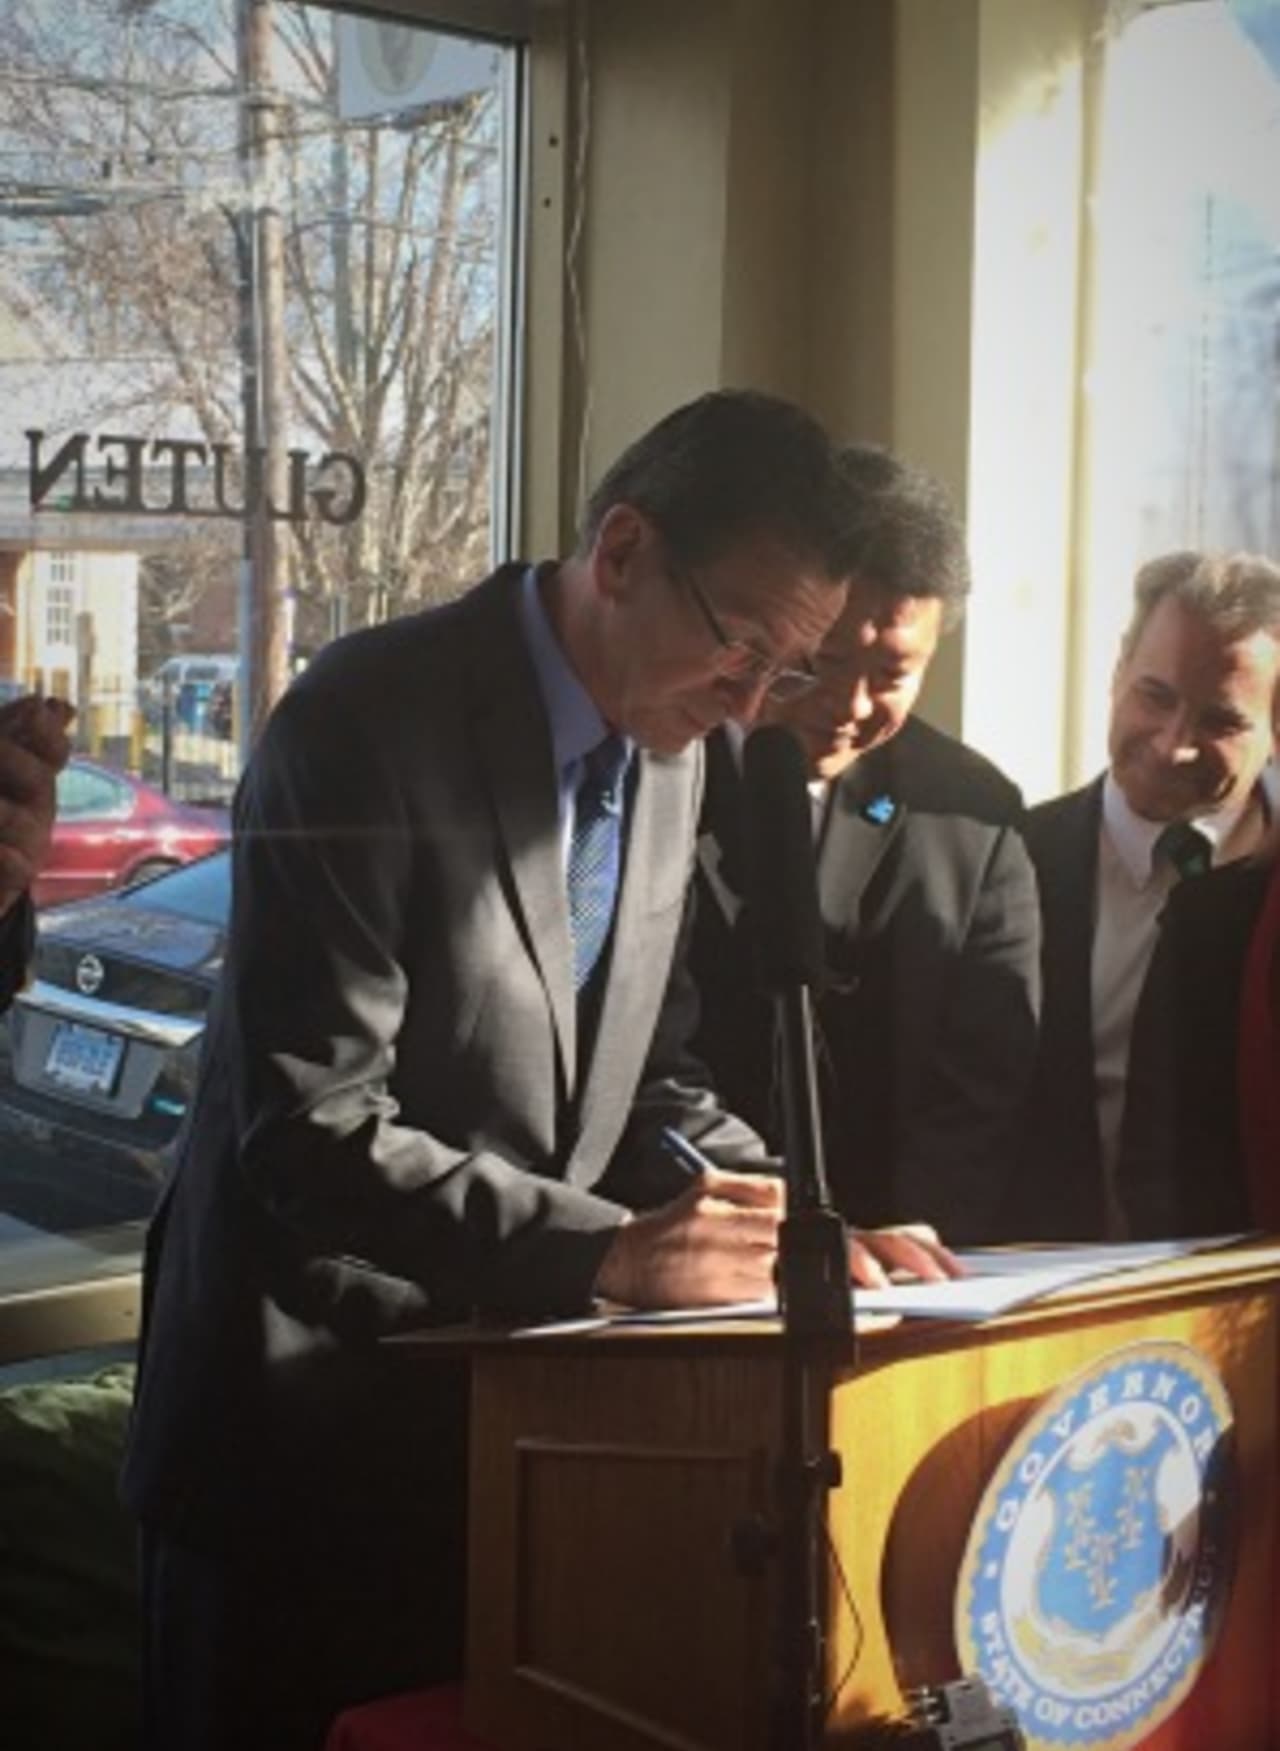 Gov. Dannel Malloy signs the GMO labeling law in Fairfield's Catch A Healthy Habit Cafe with local lawmakers and supporters. 